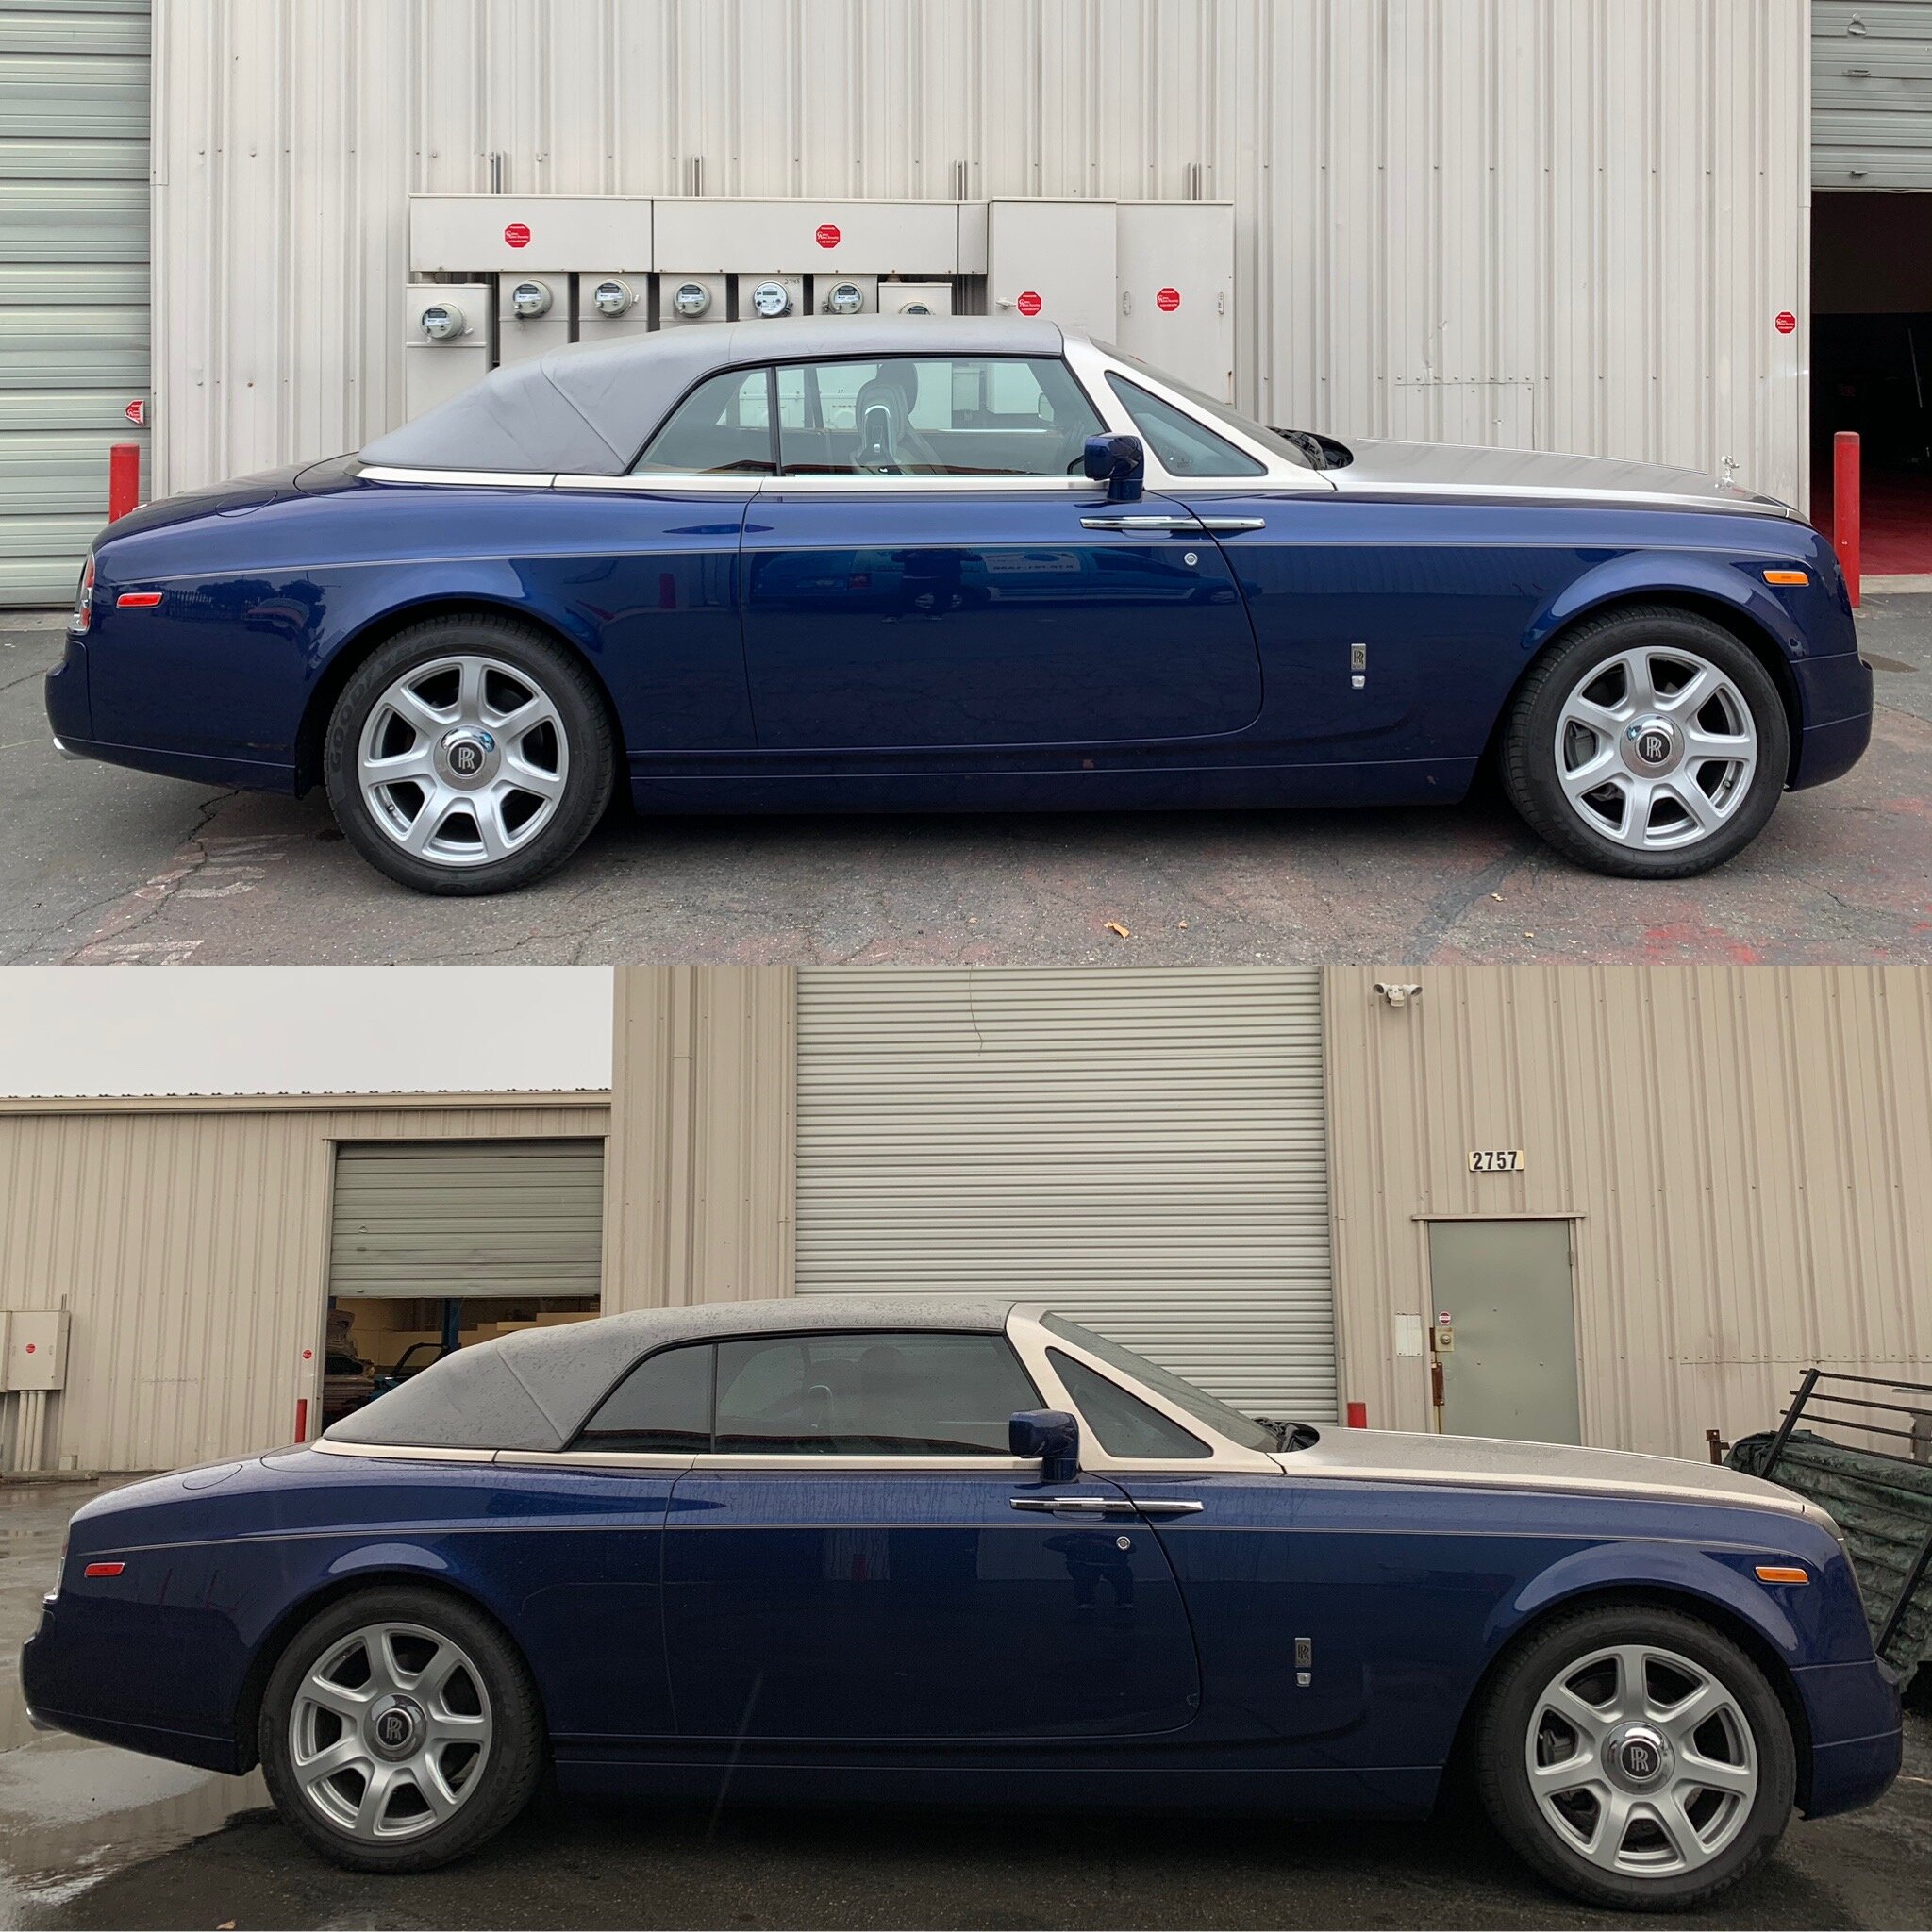 Rolls Royce (Before & After)